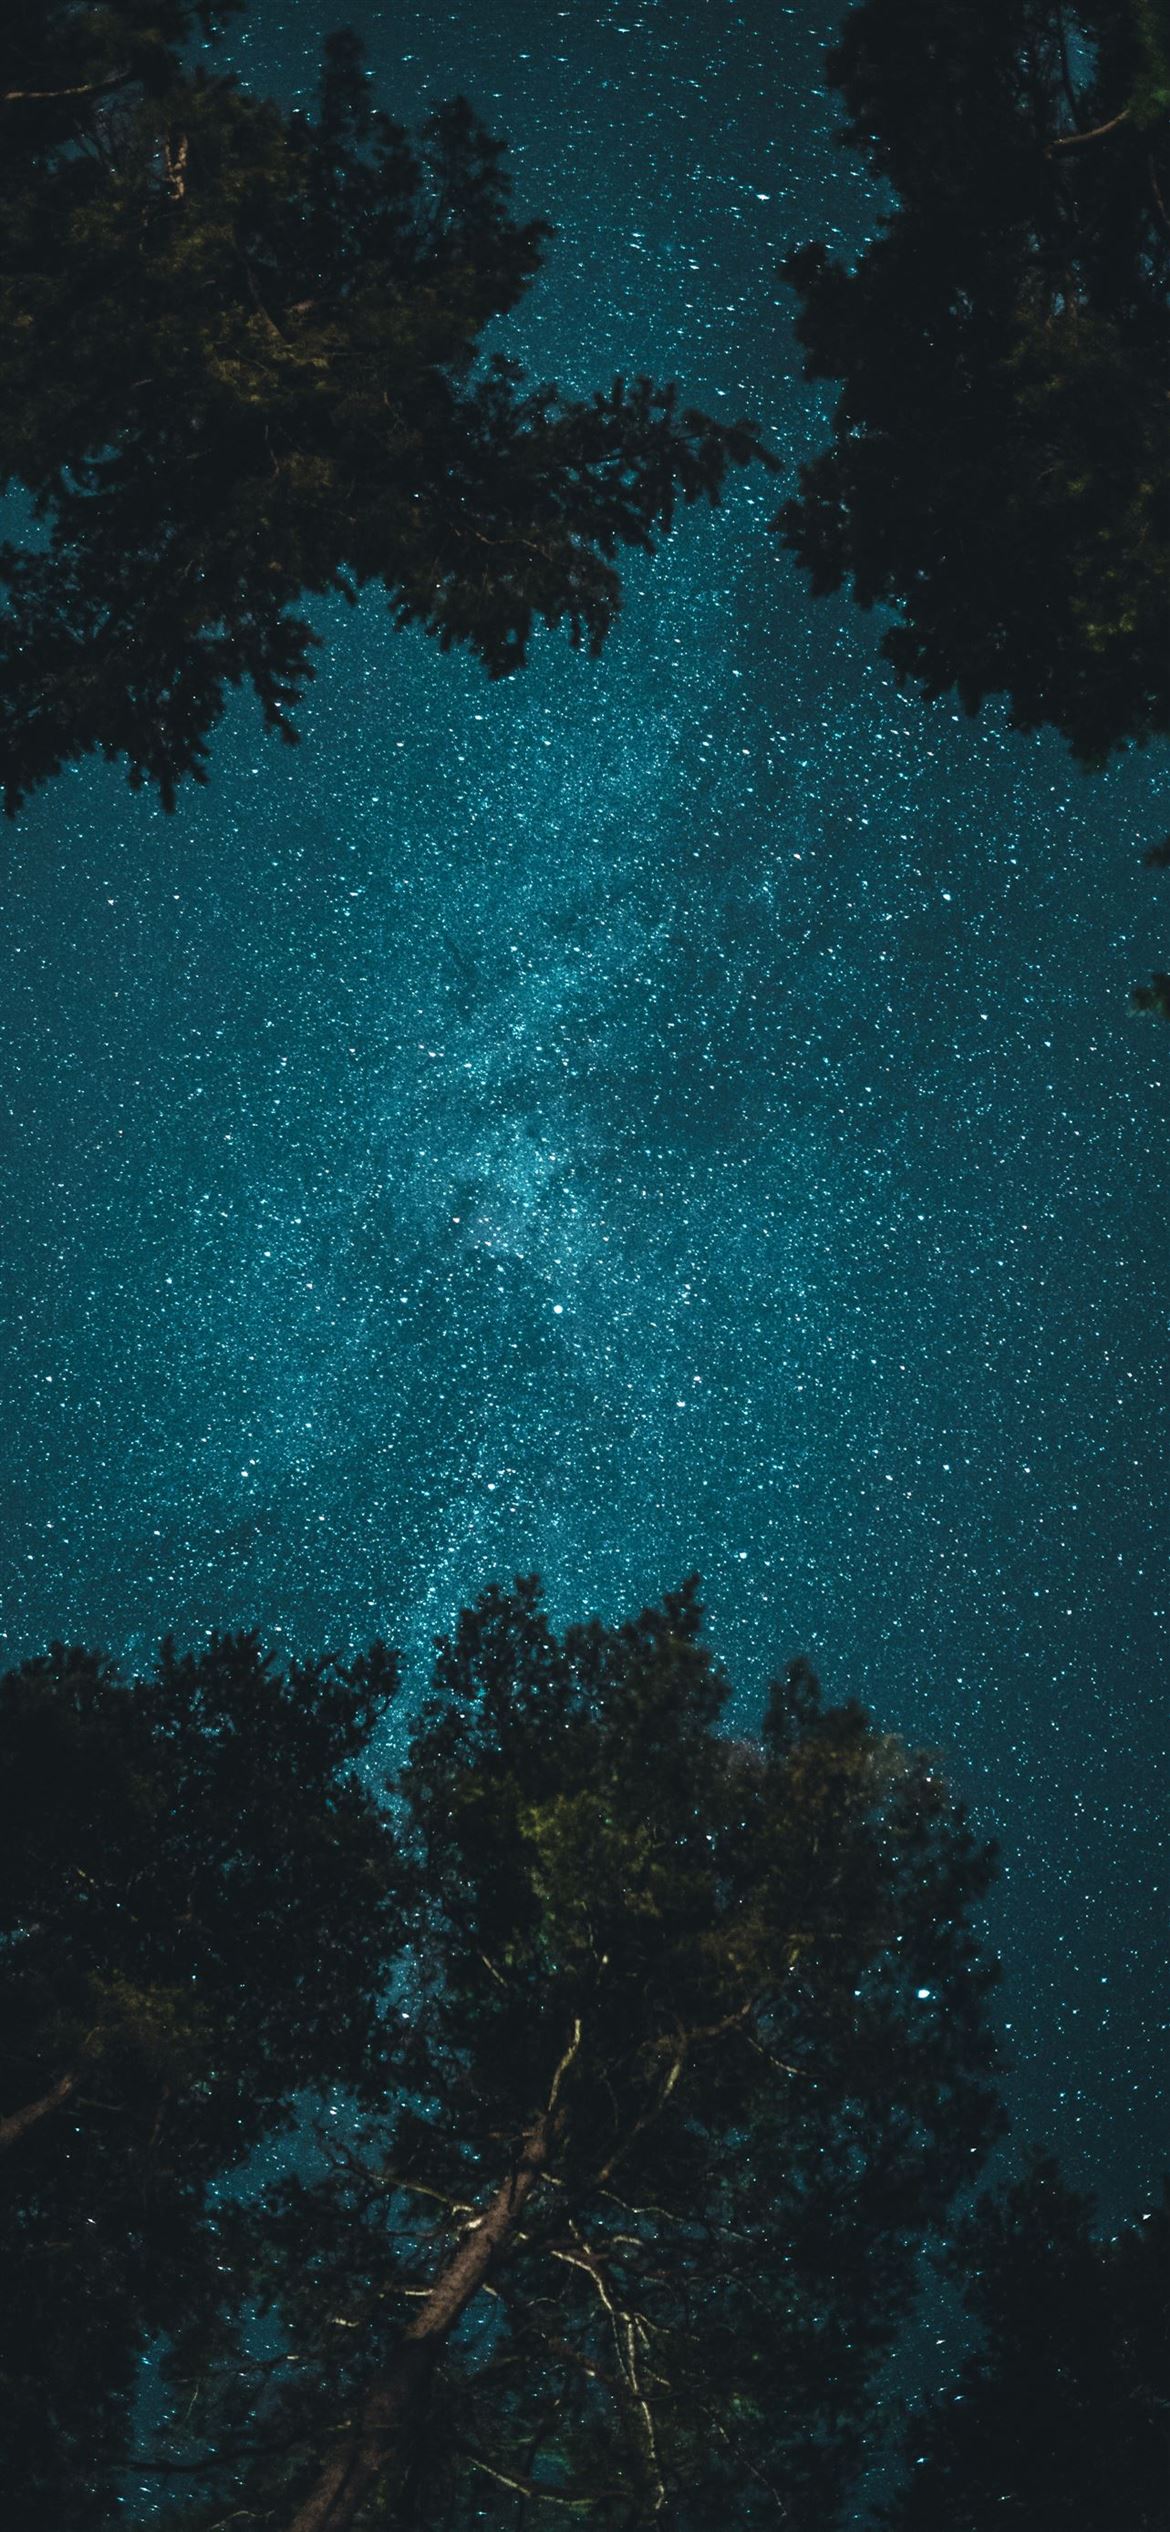 A night sky with stars above a forest of trees. - Forest